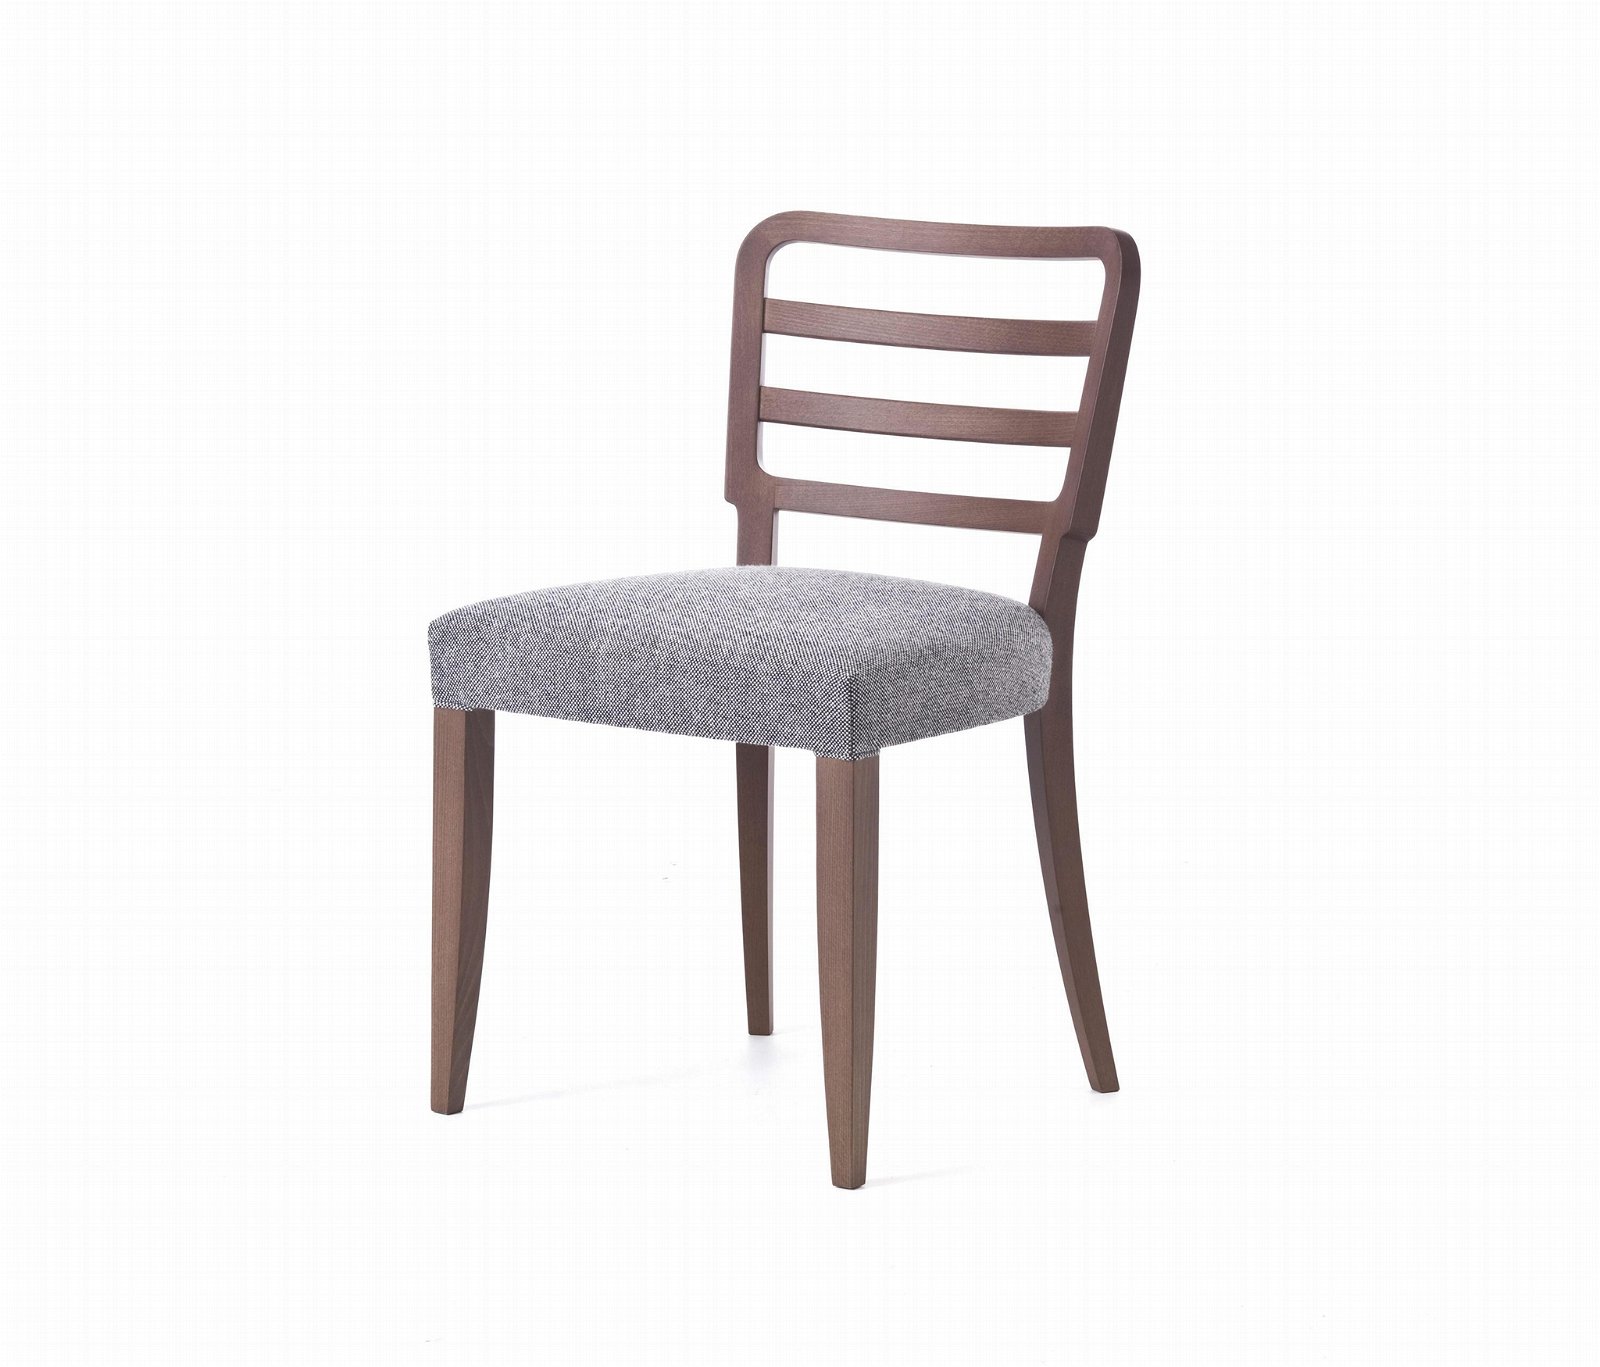 Modern classical solid ash wood chair for sale